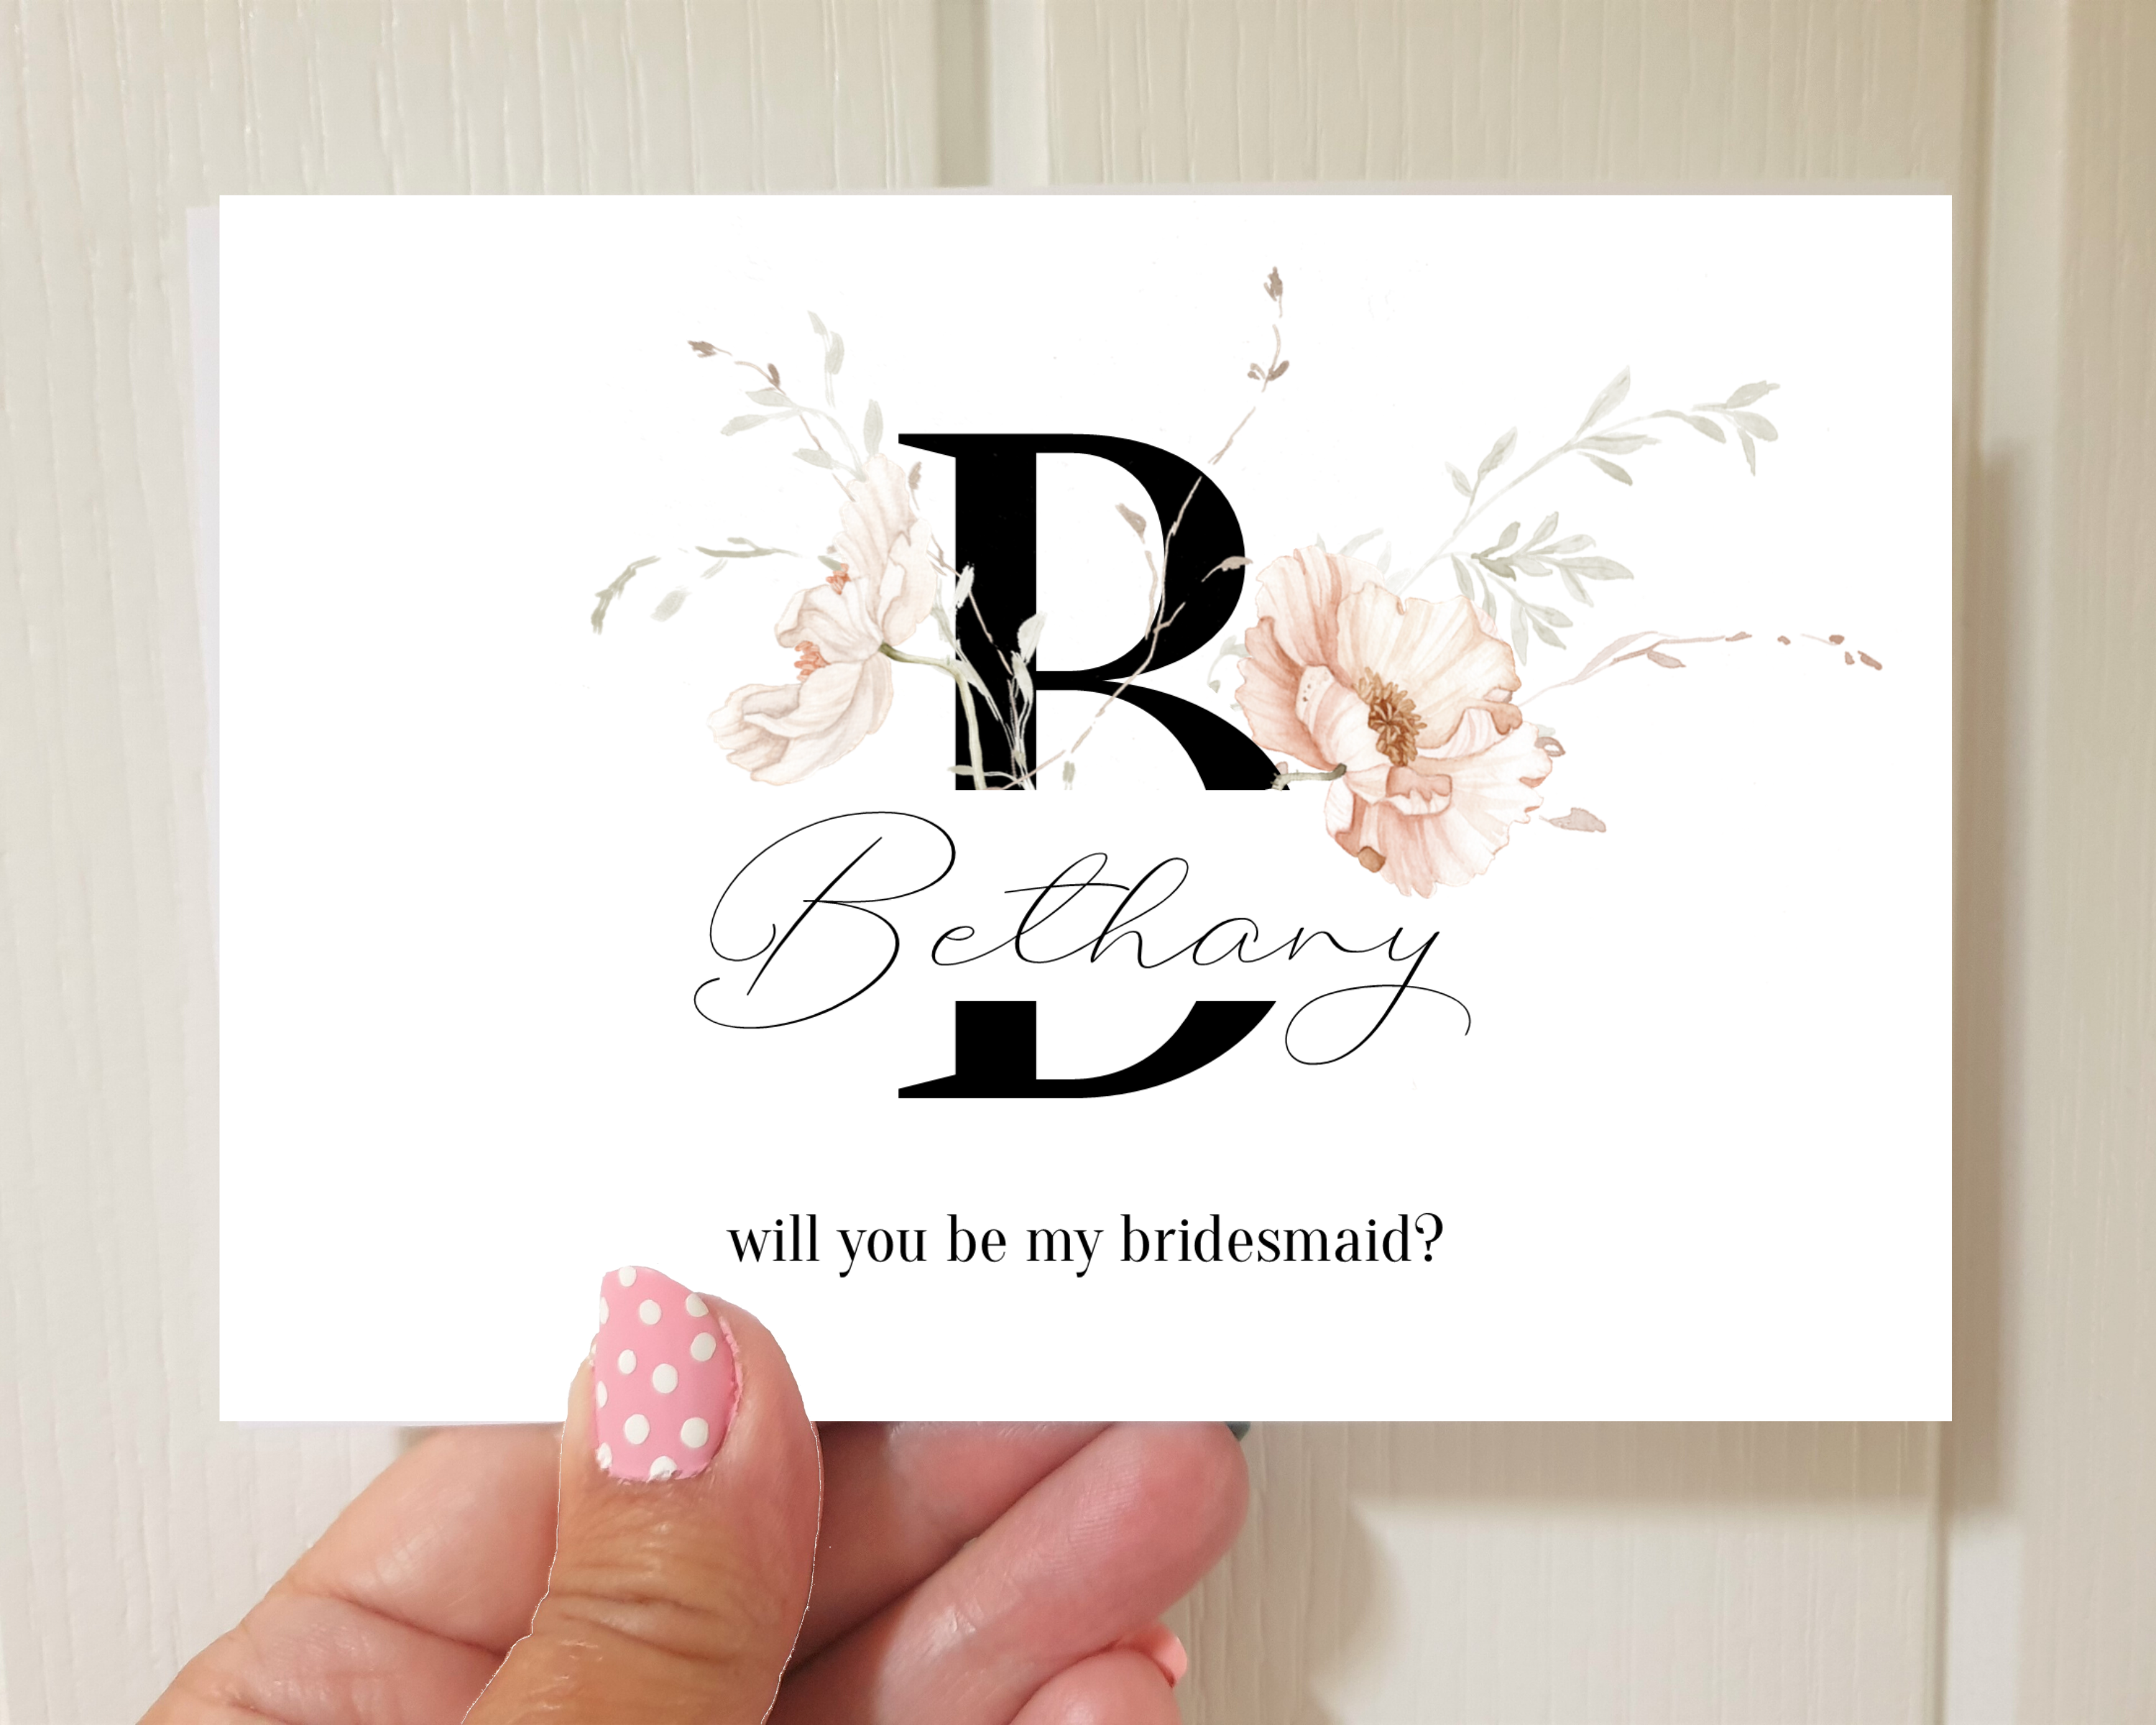 Front of an Icelandic poppy A6 Poppleberry 'Will you be my...?' bridesmaid proposal card, held to show size.